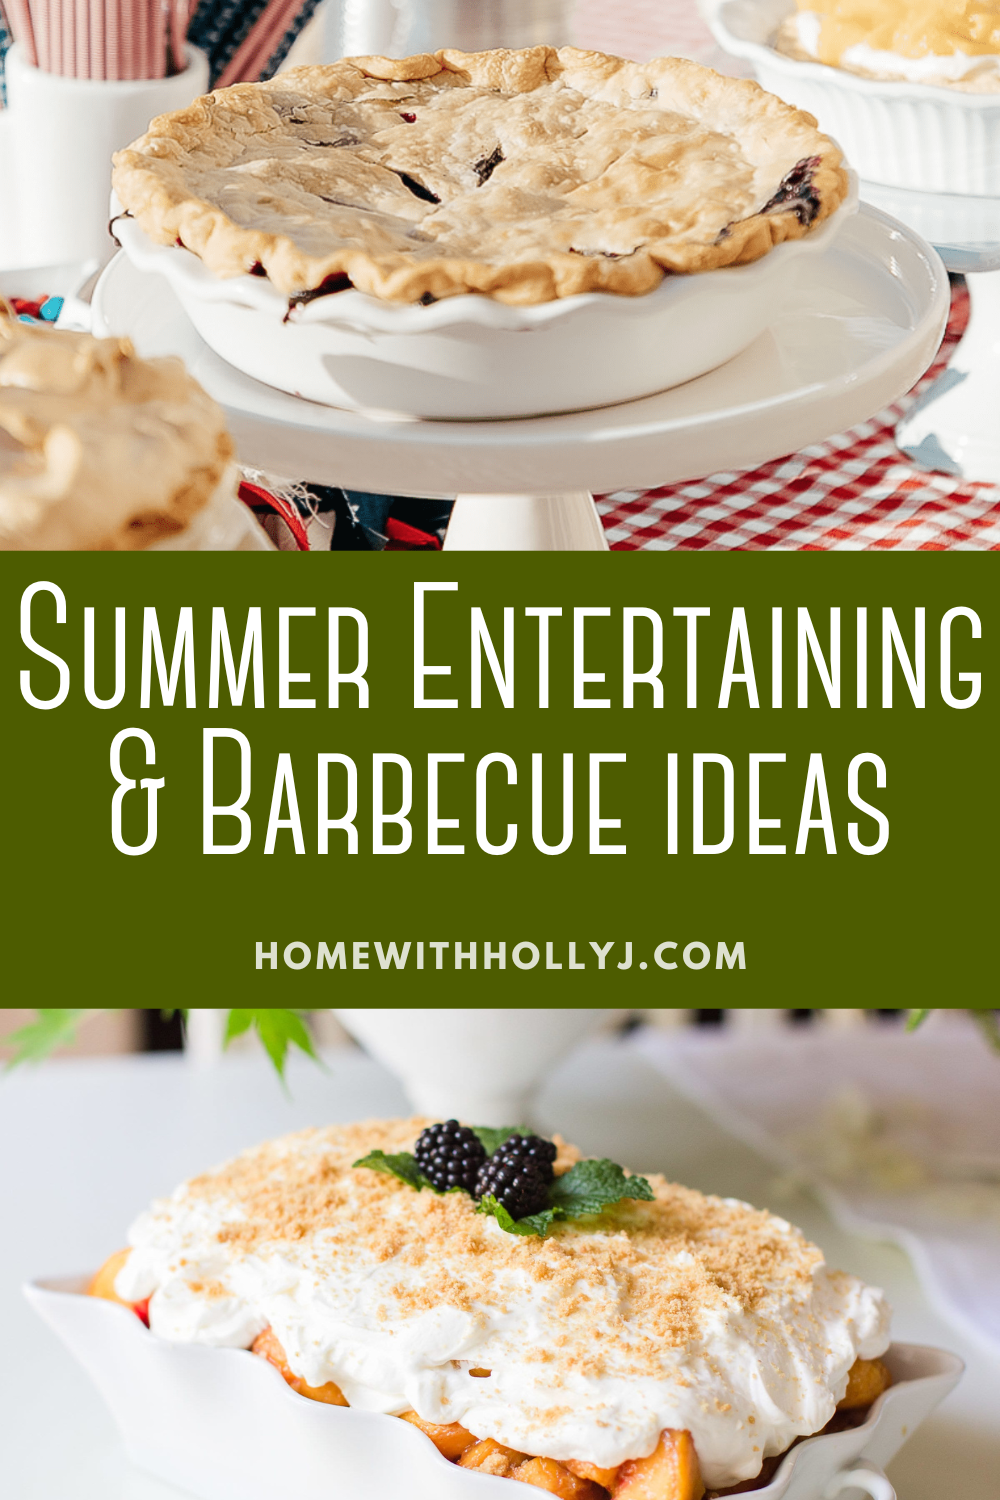 Sharing some favorite simple summer recipes including fresh fruit pies, lemon basil chicken, and barbecue meat for everyone to enjoy